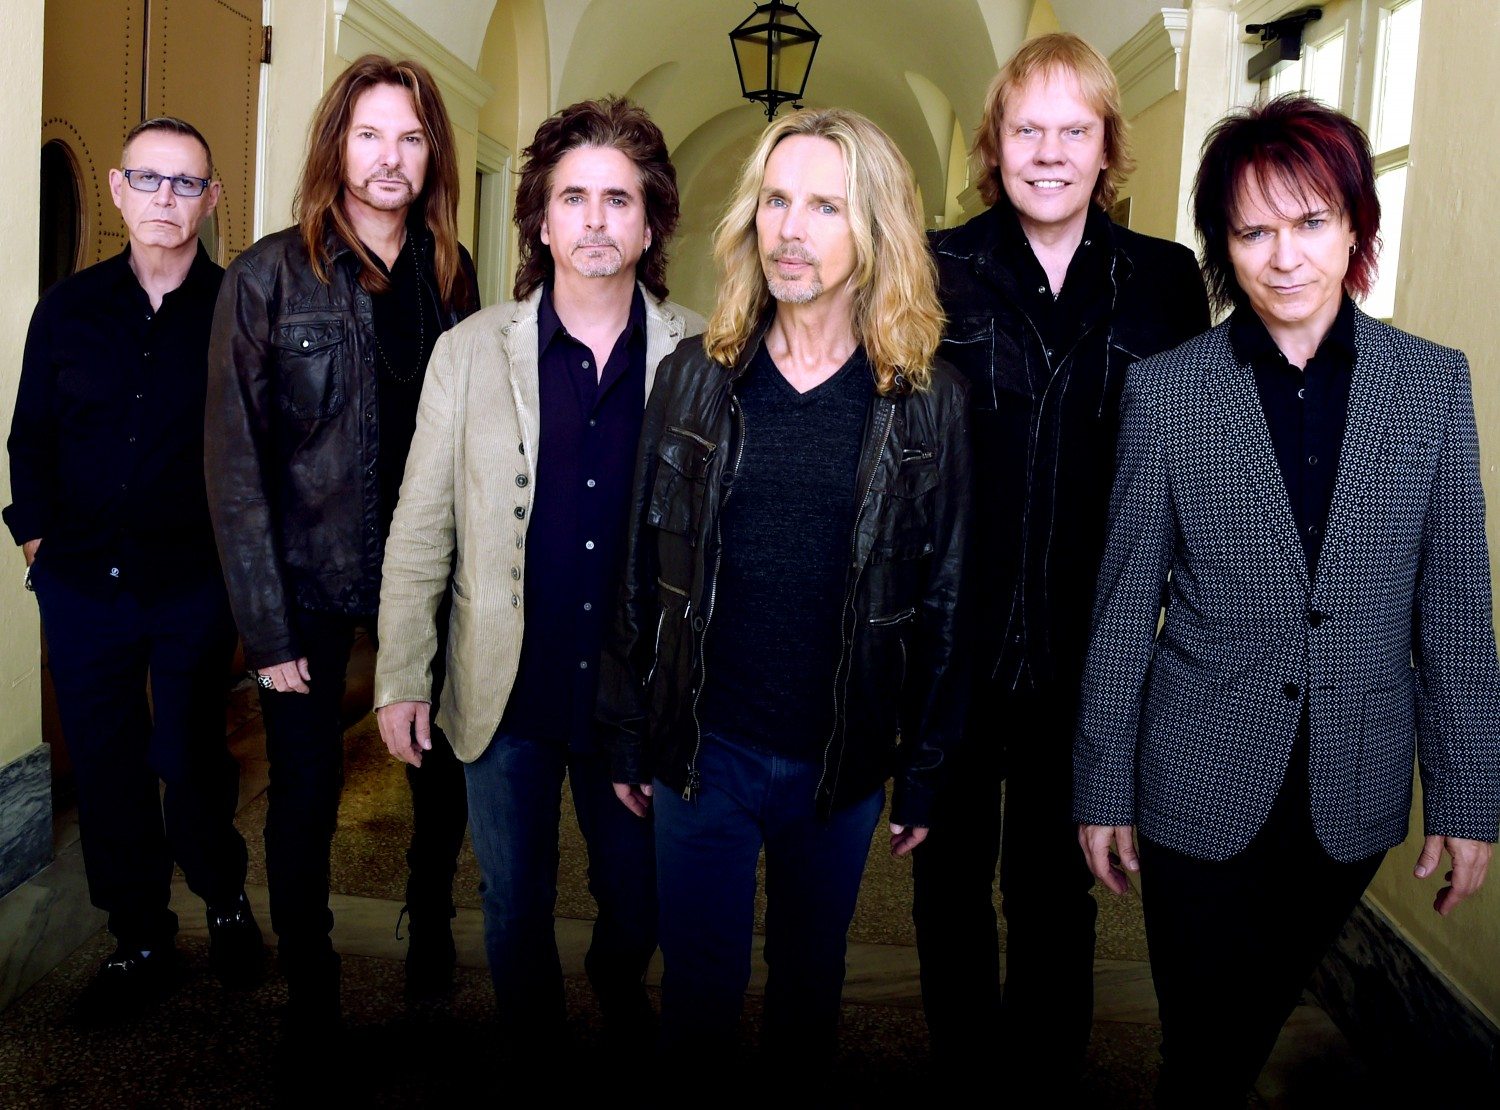 Styx’s Lawrence Gowan Talks Touring With Def Leppard and Tesla, Playing New York City, Solo Career and More